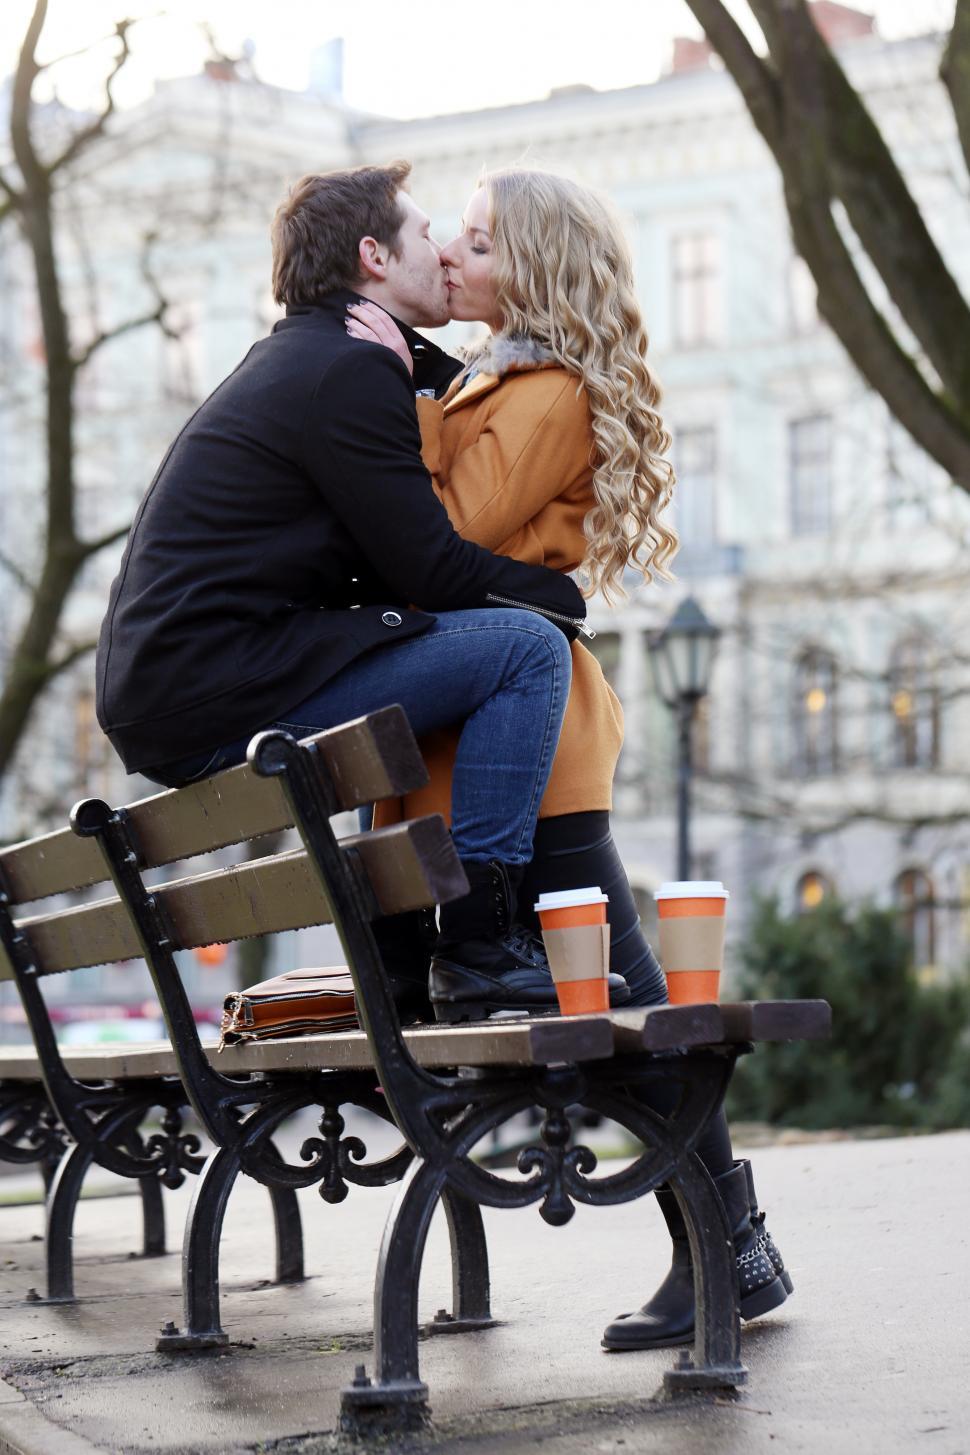 Free Image of Beautiful couple kiss in the park 